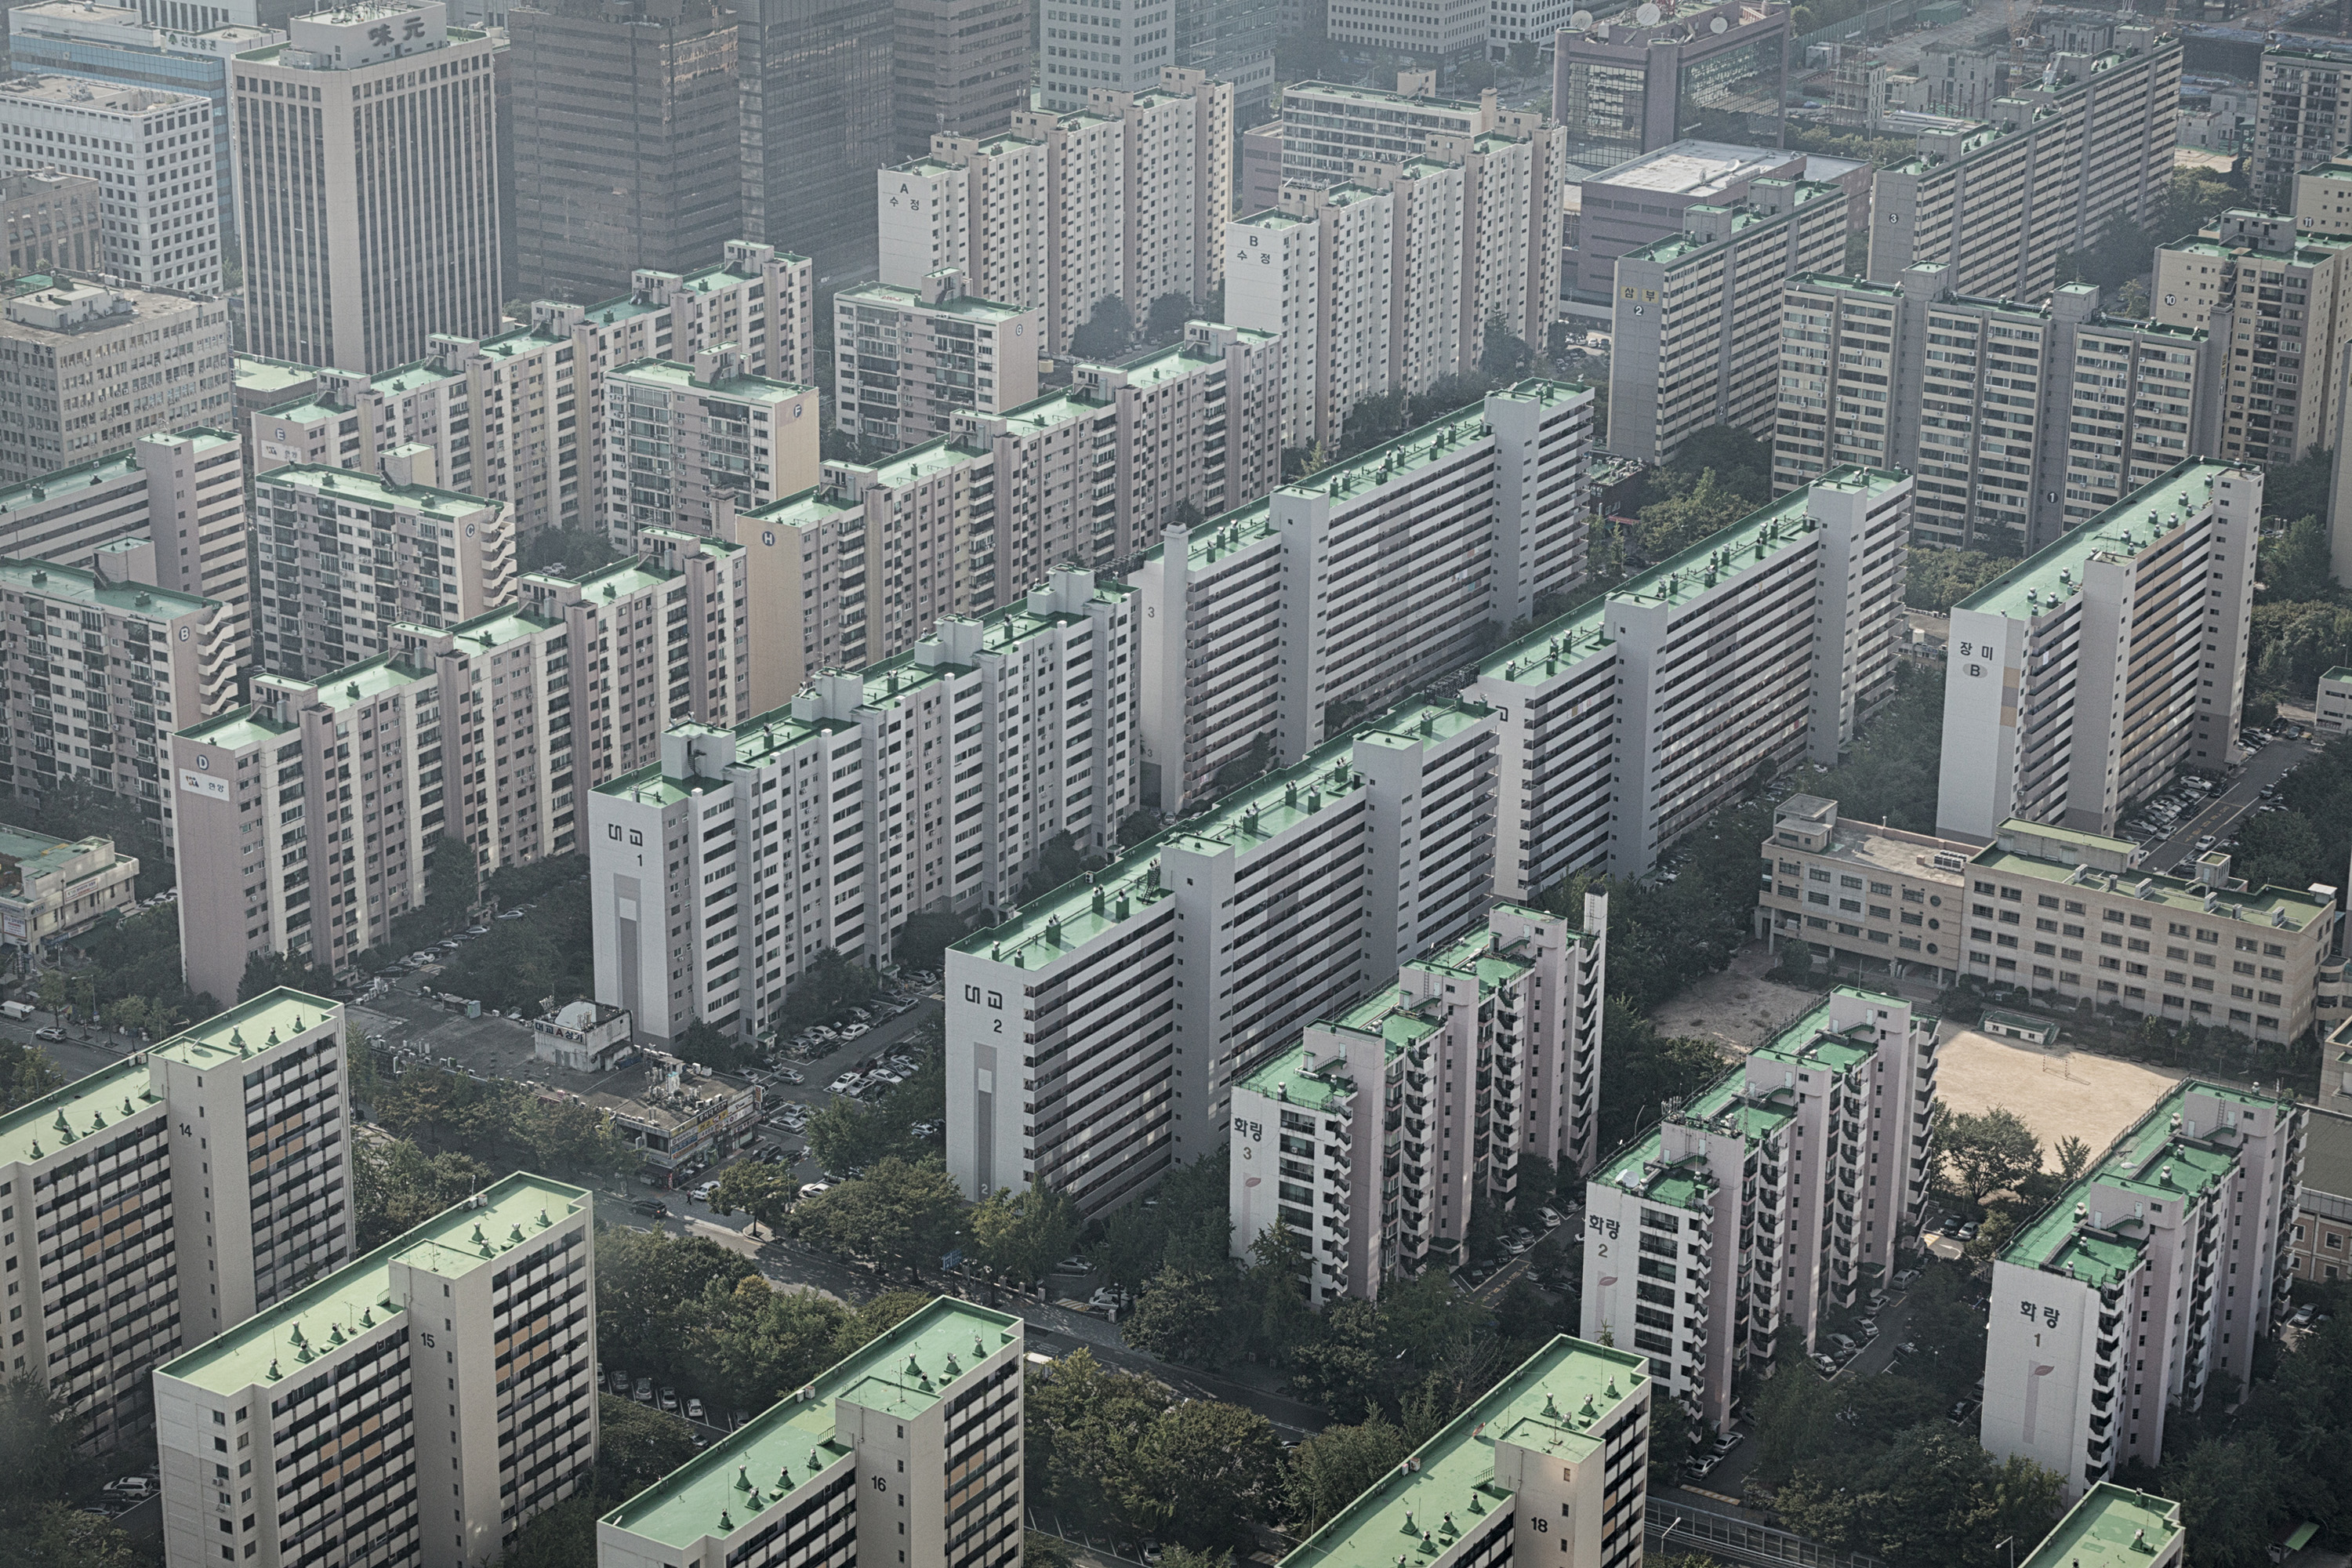 Picture of prosperity: After decades of growth, South Korea has a skyline to match, with a coast-to-coast line of apartments, such as the Yeouido-dong section of Seoul. | THE WASHINGTON POST